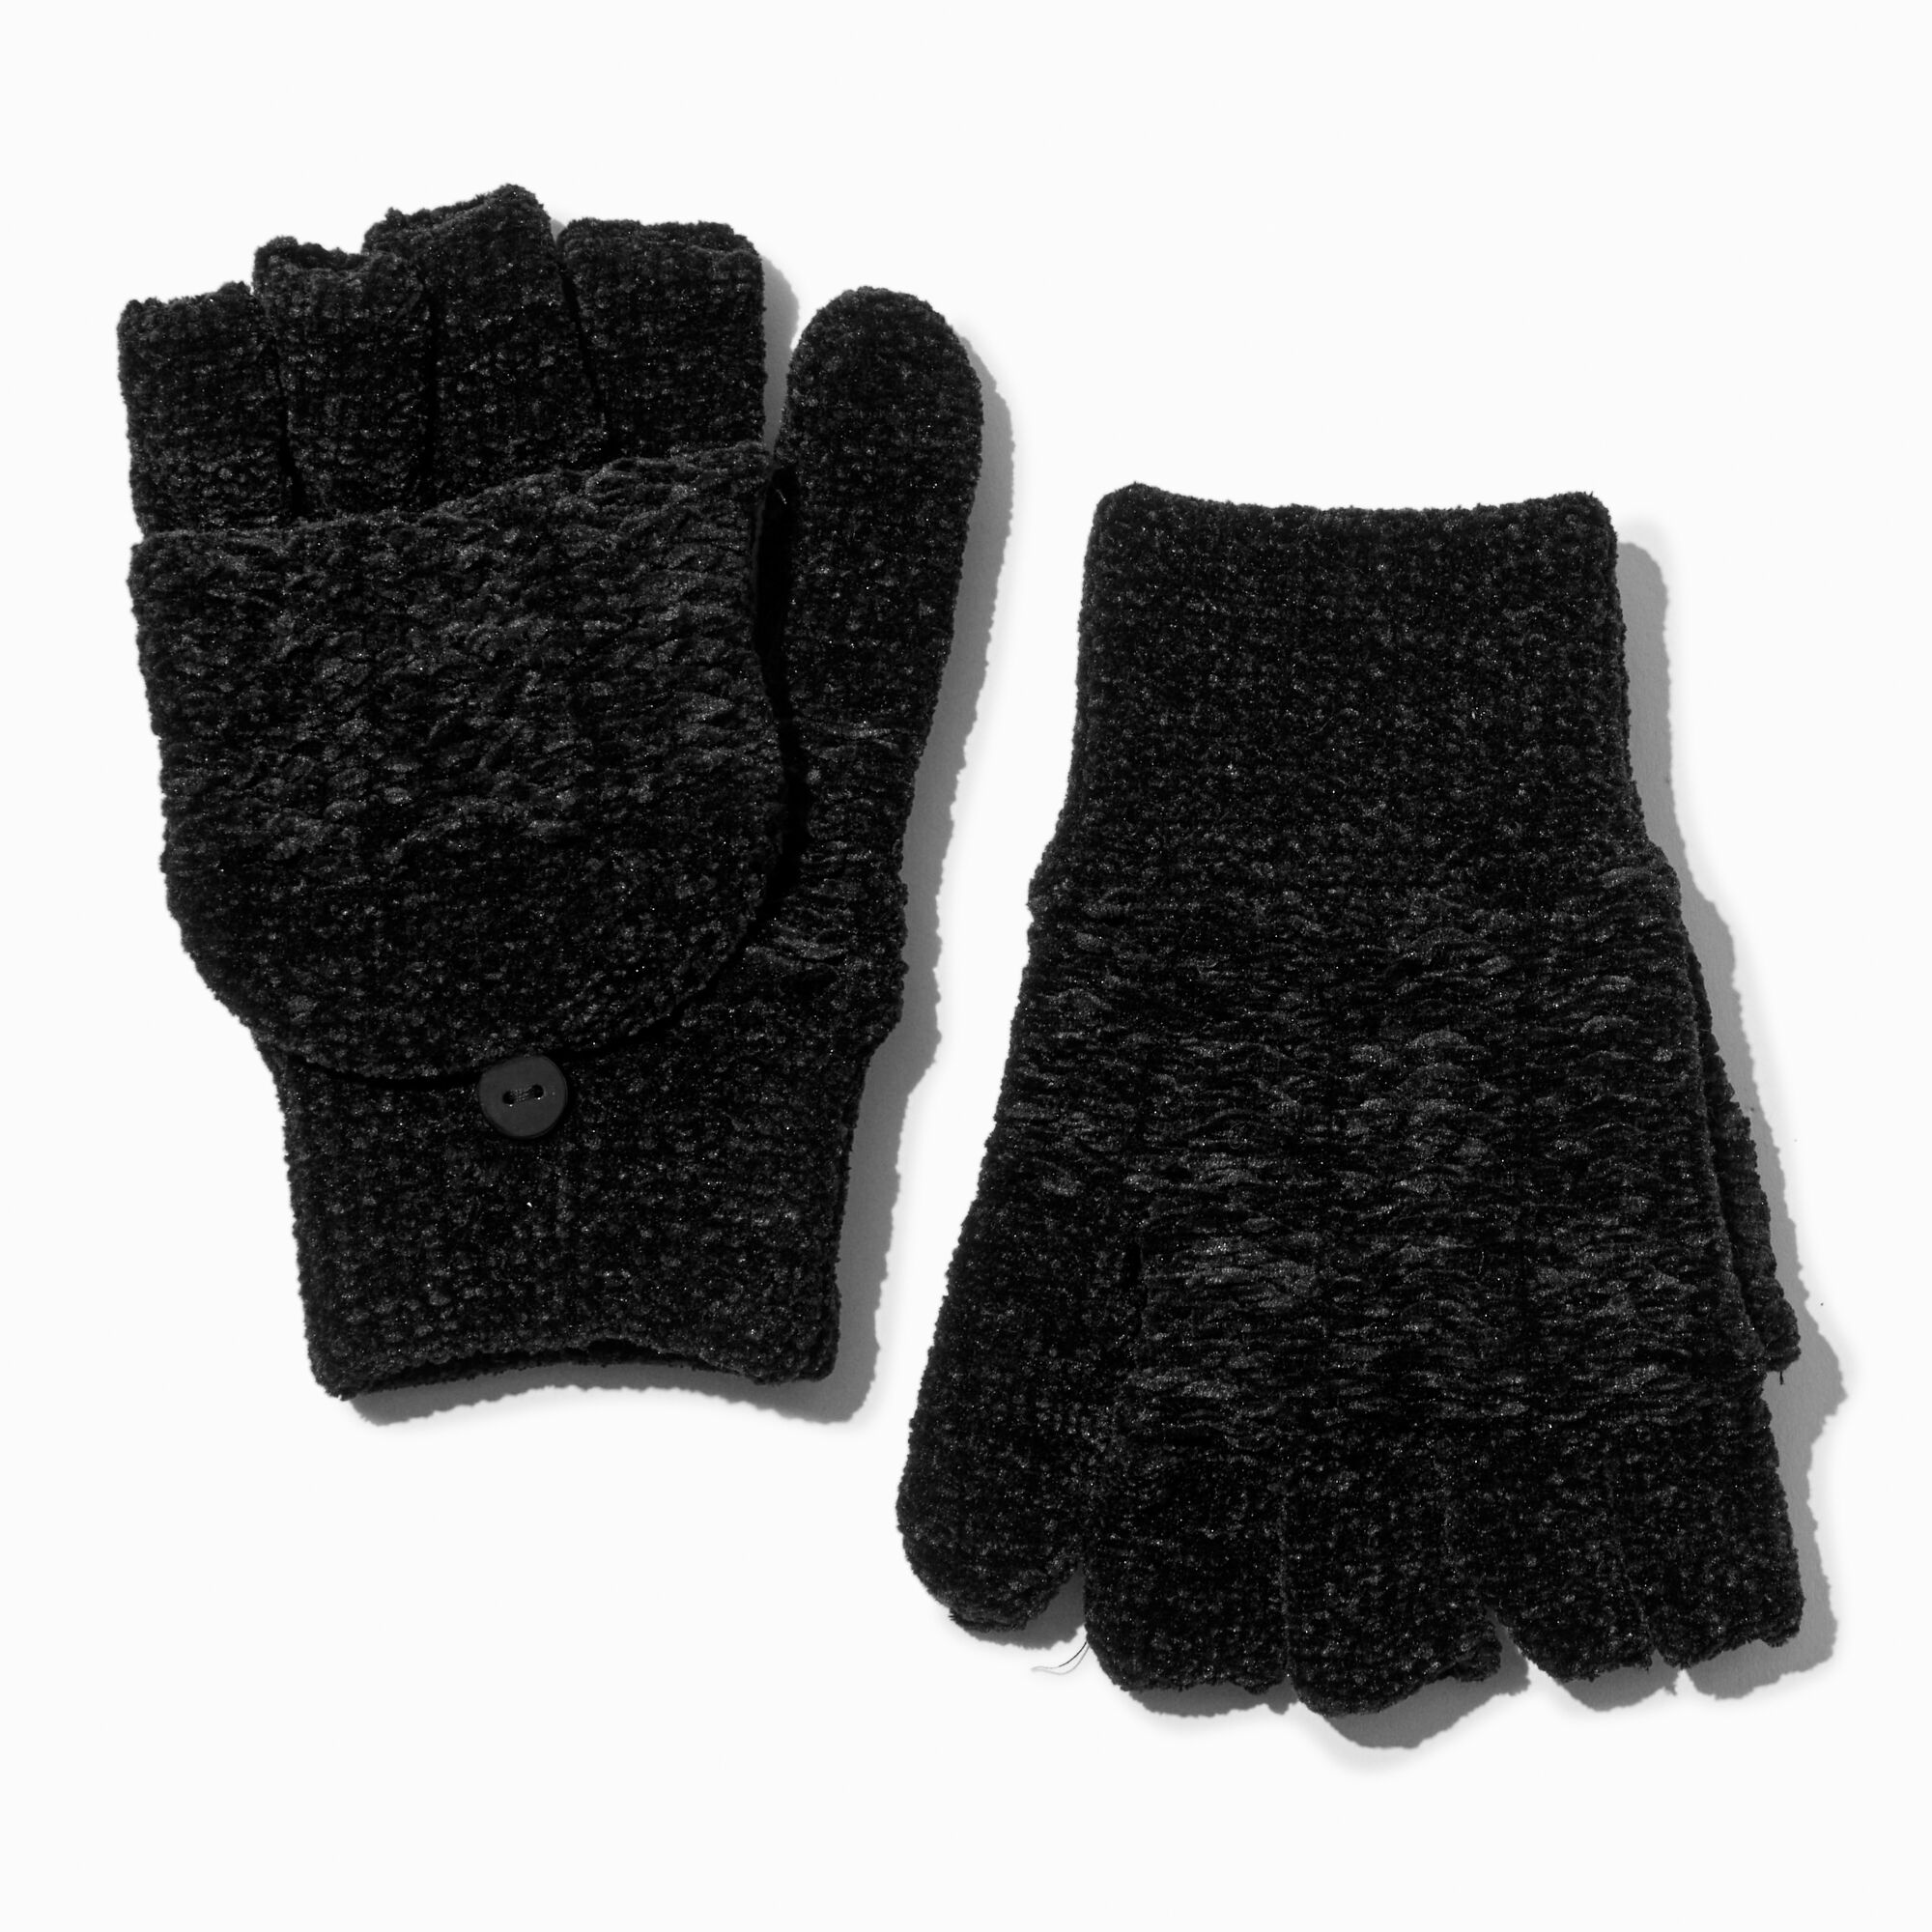 View Claires Convertible Gloves Black information